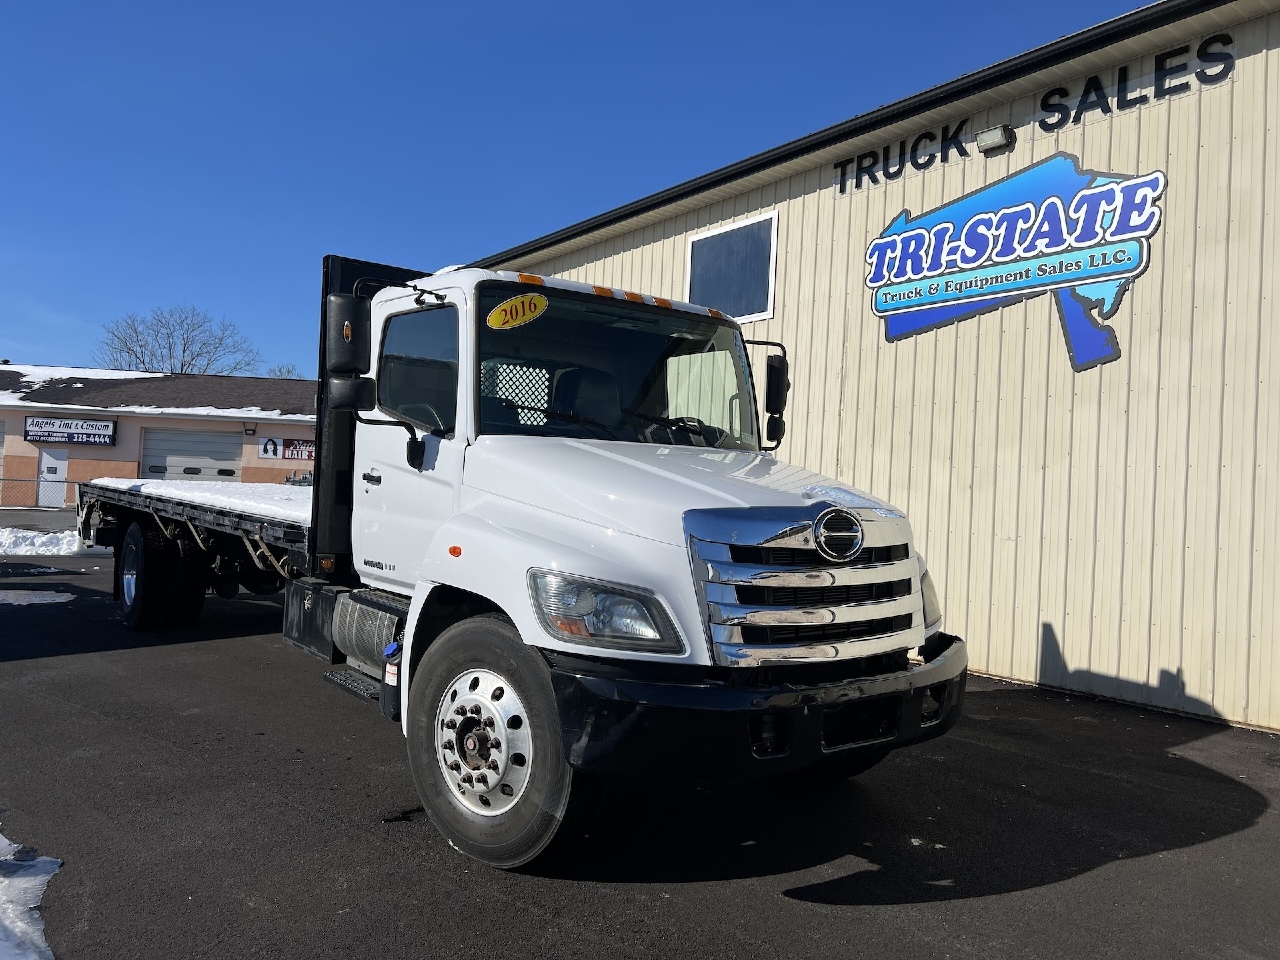 USED 2016 HINO 268 FLATBED TRUCK #6607